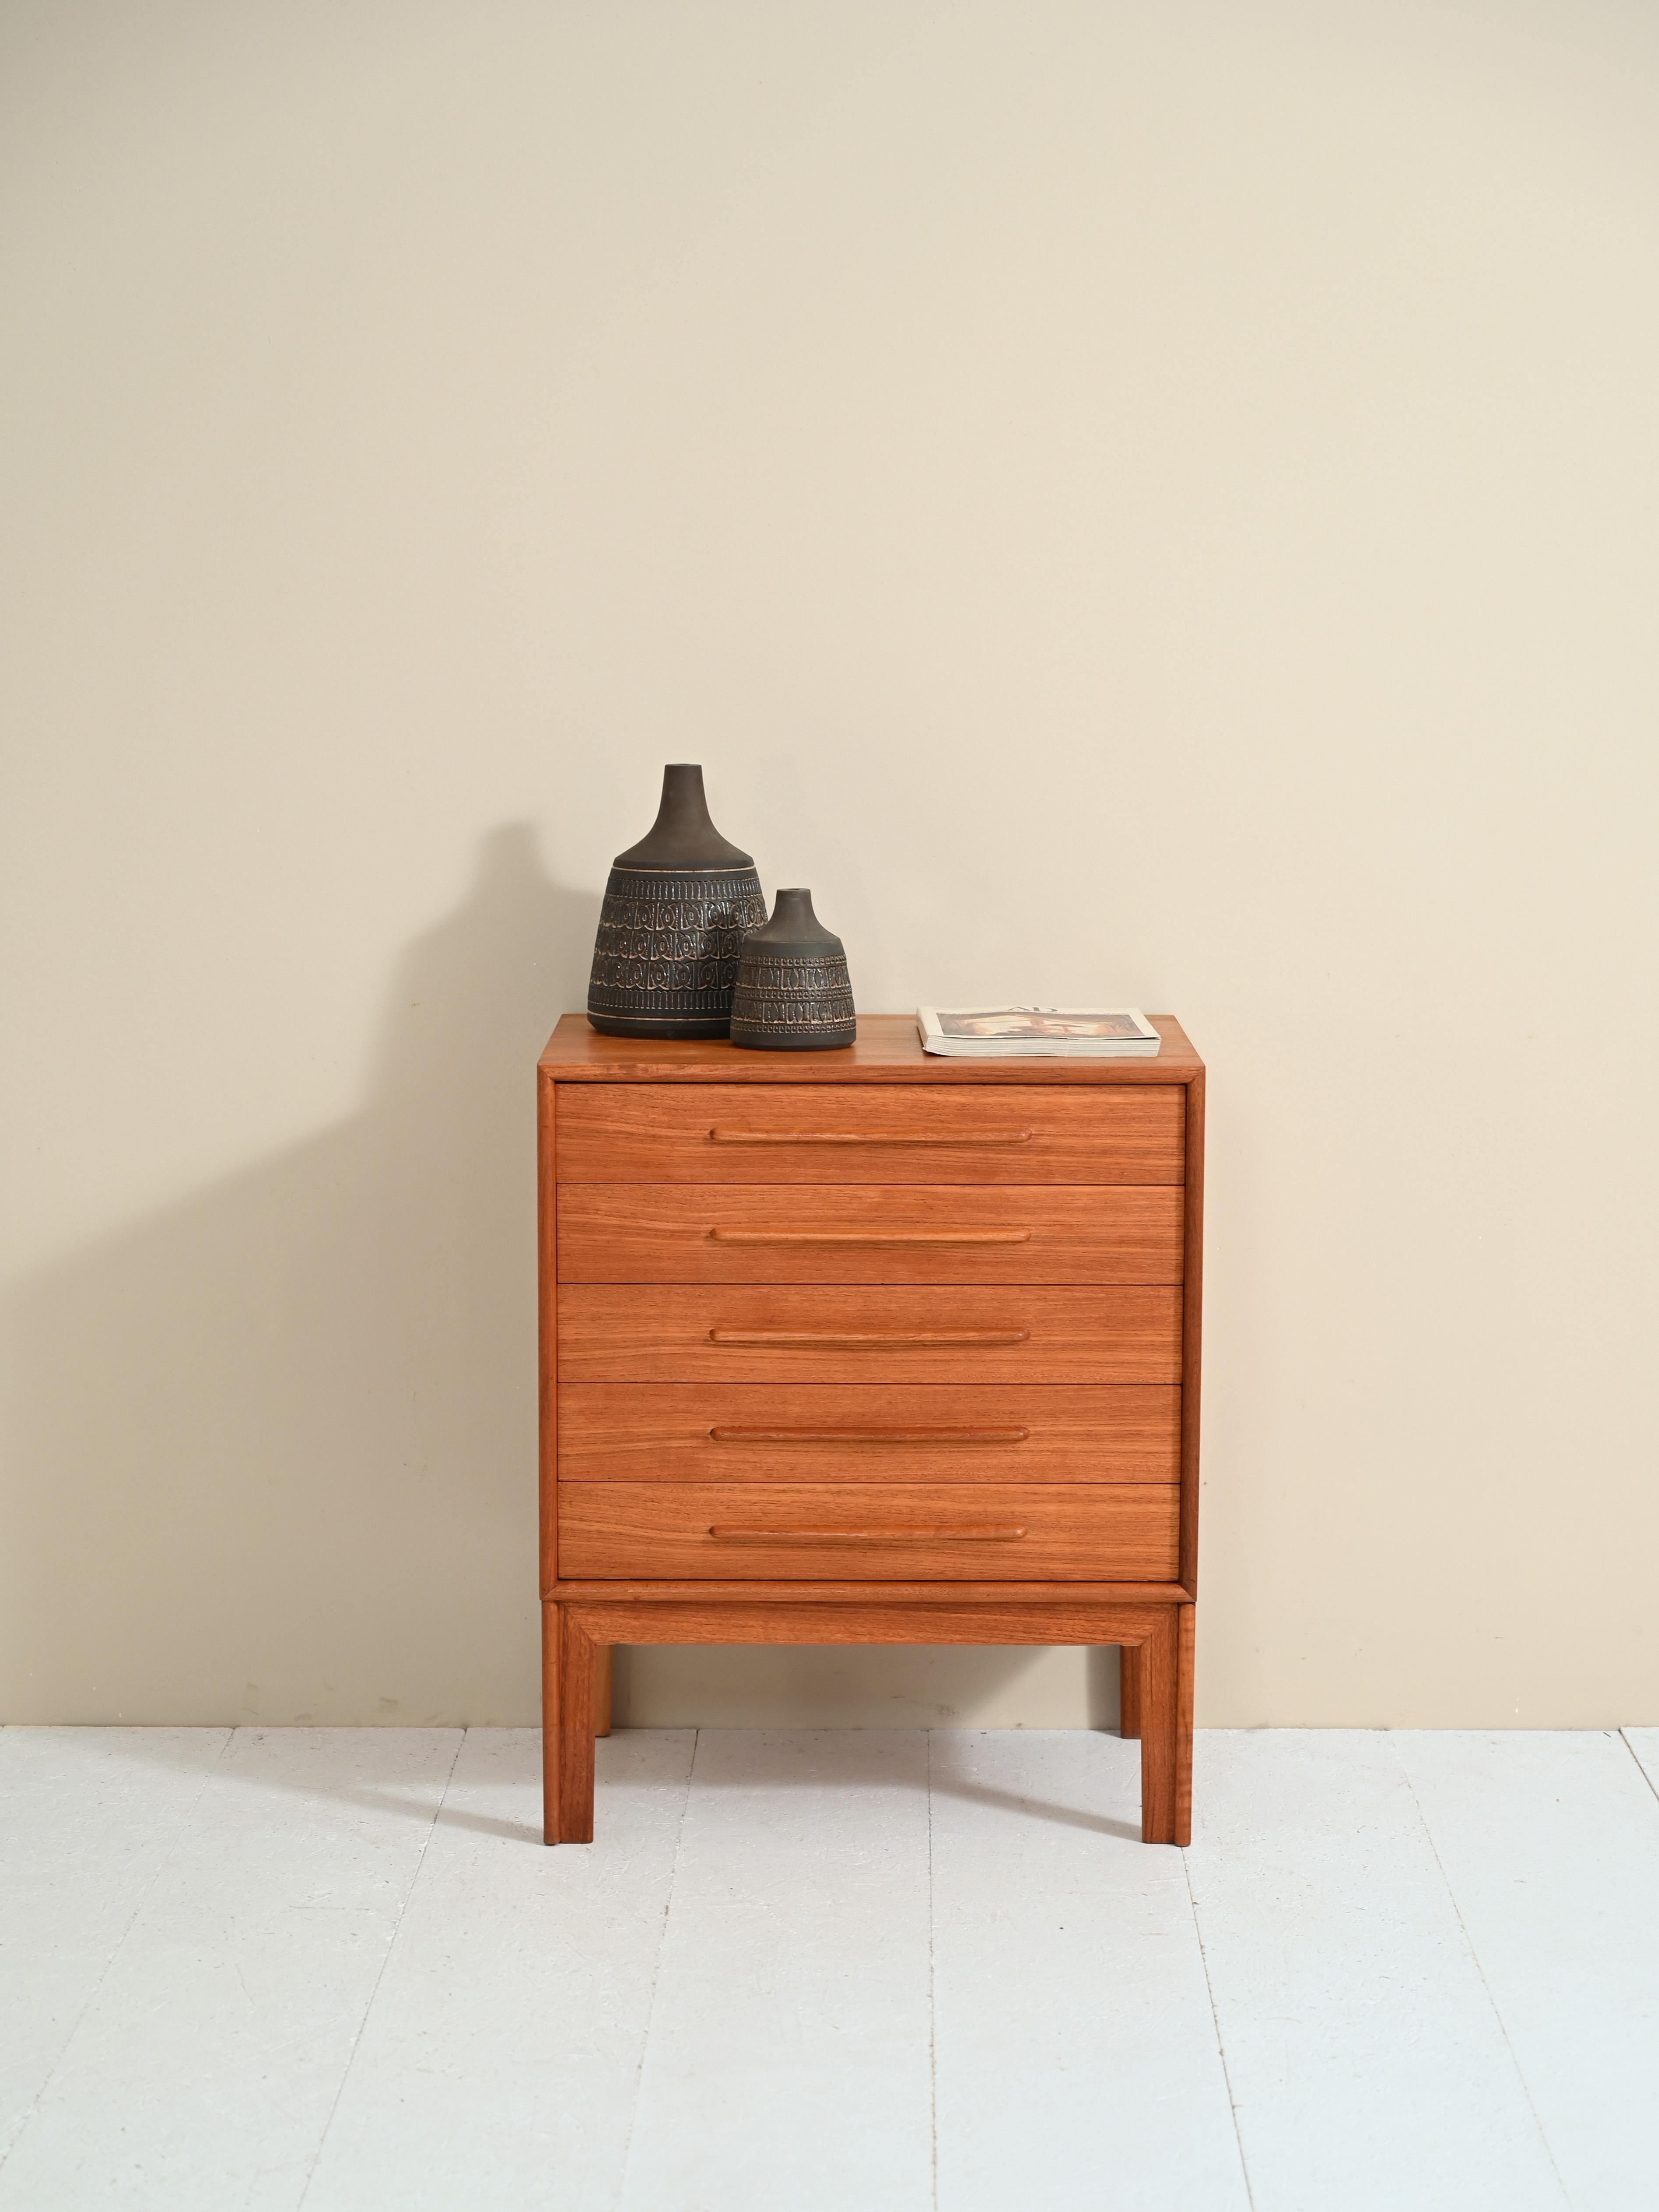 Teak wood chest of drawers designed by Alf Svensson in the 1960s.

This solid chest of drawers consists of 5 drawers with carved wooden handles.

It was produced in the 1960s in Sweden by designer Alf Svensson.

Excellent condition.

AC075